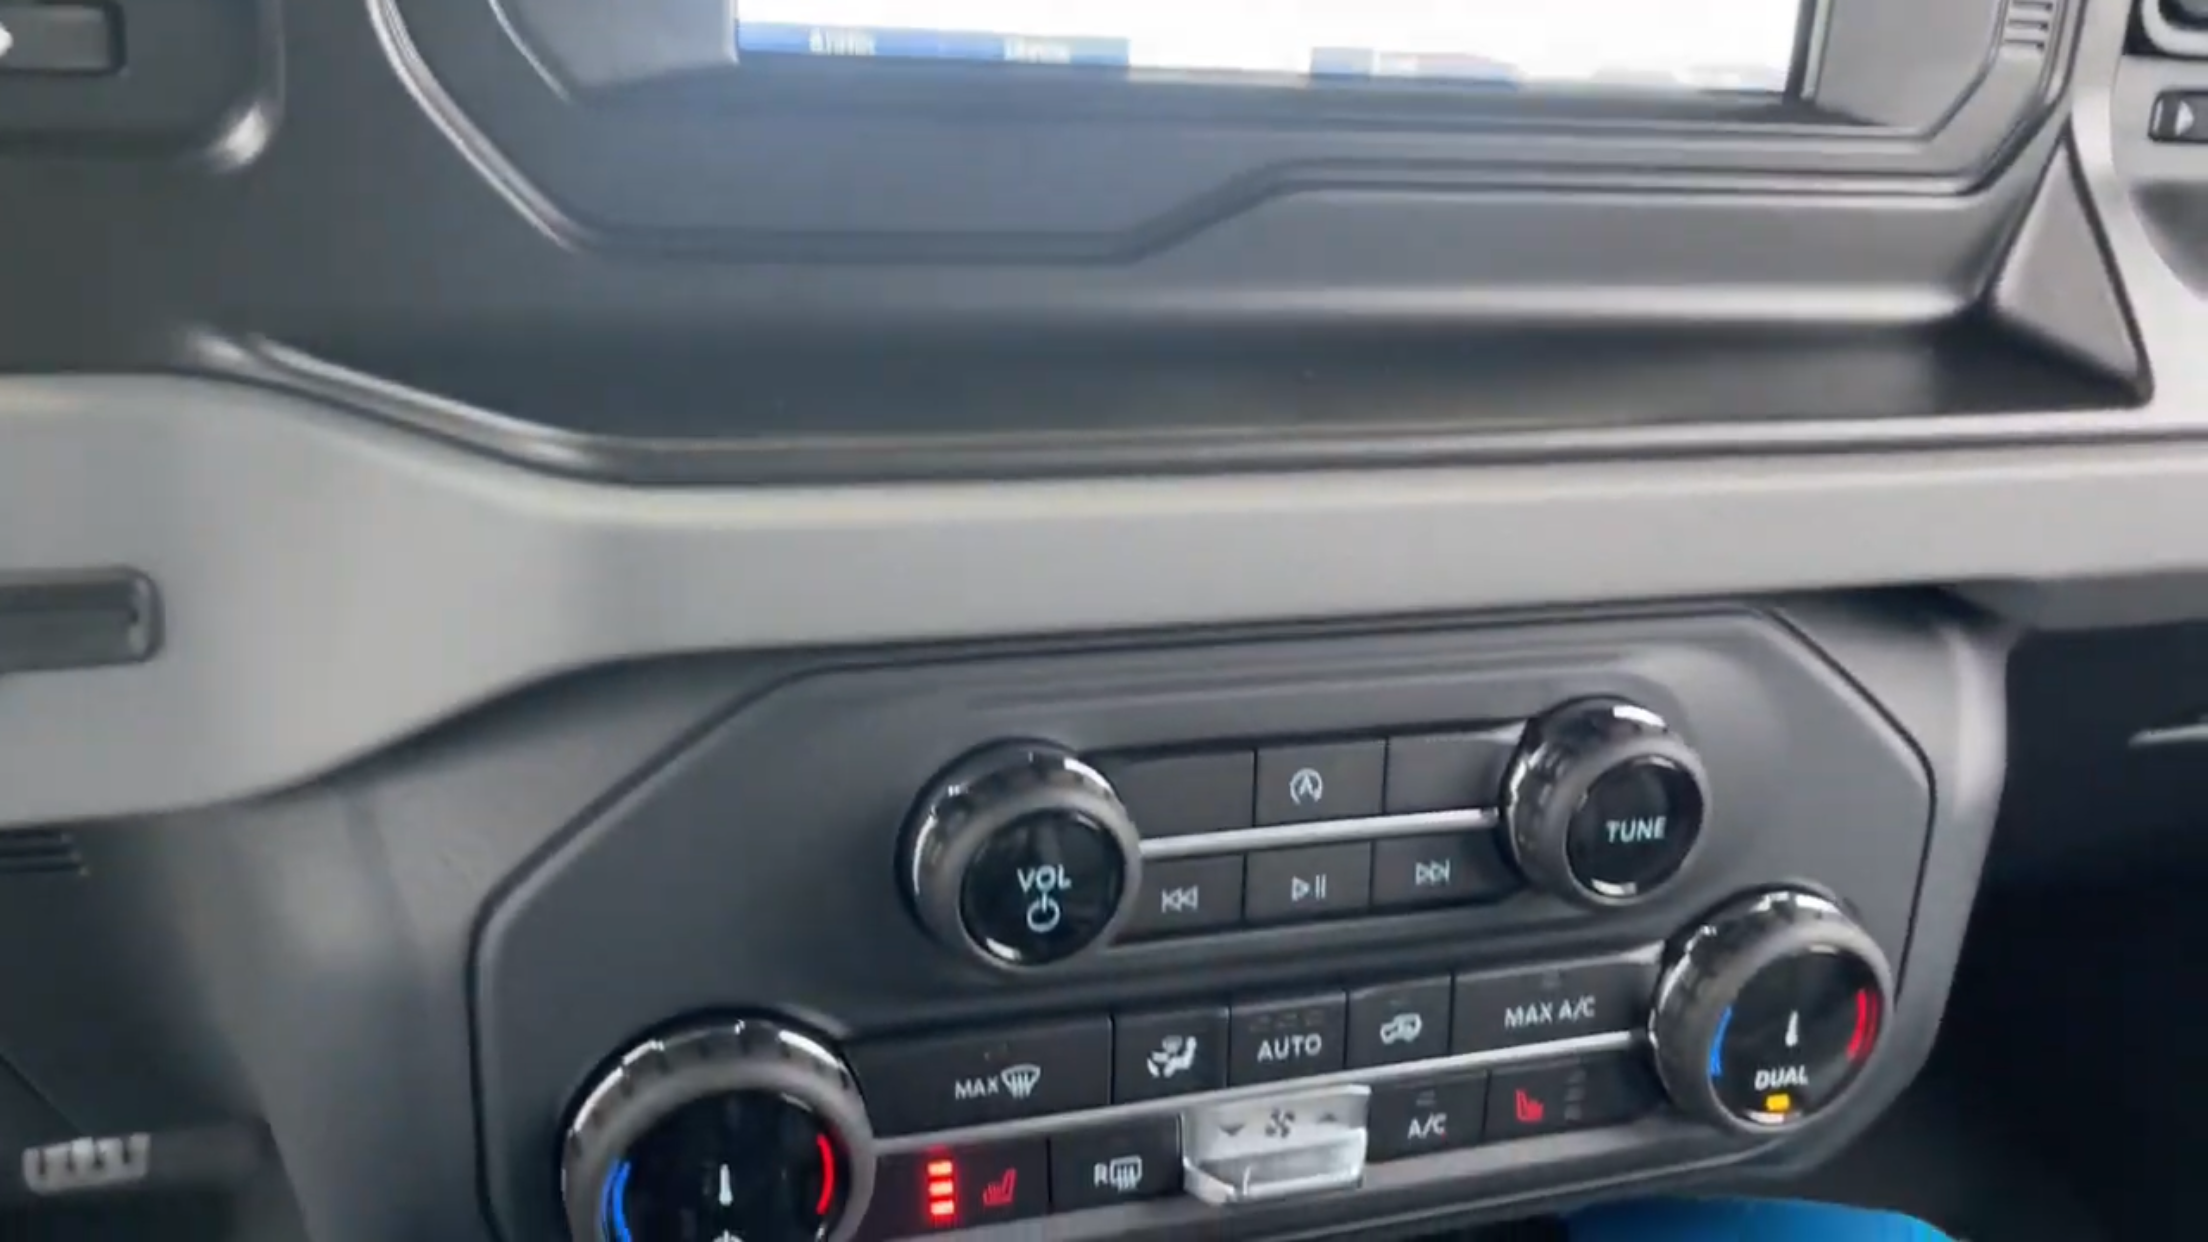 Ford Bronco 2022 Broncos No Longer Have Temperature Setting Displayed on Control Knobs 1642789133480